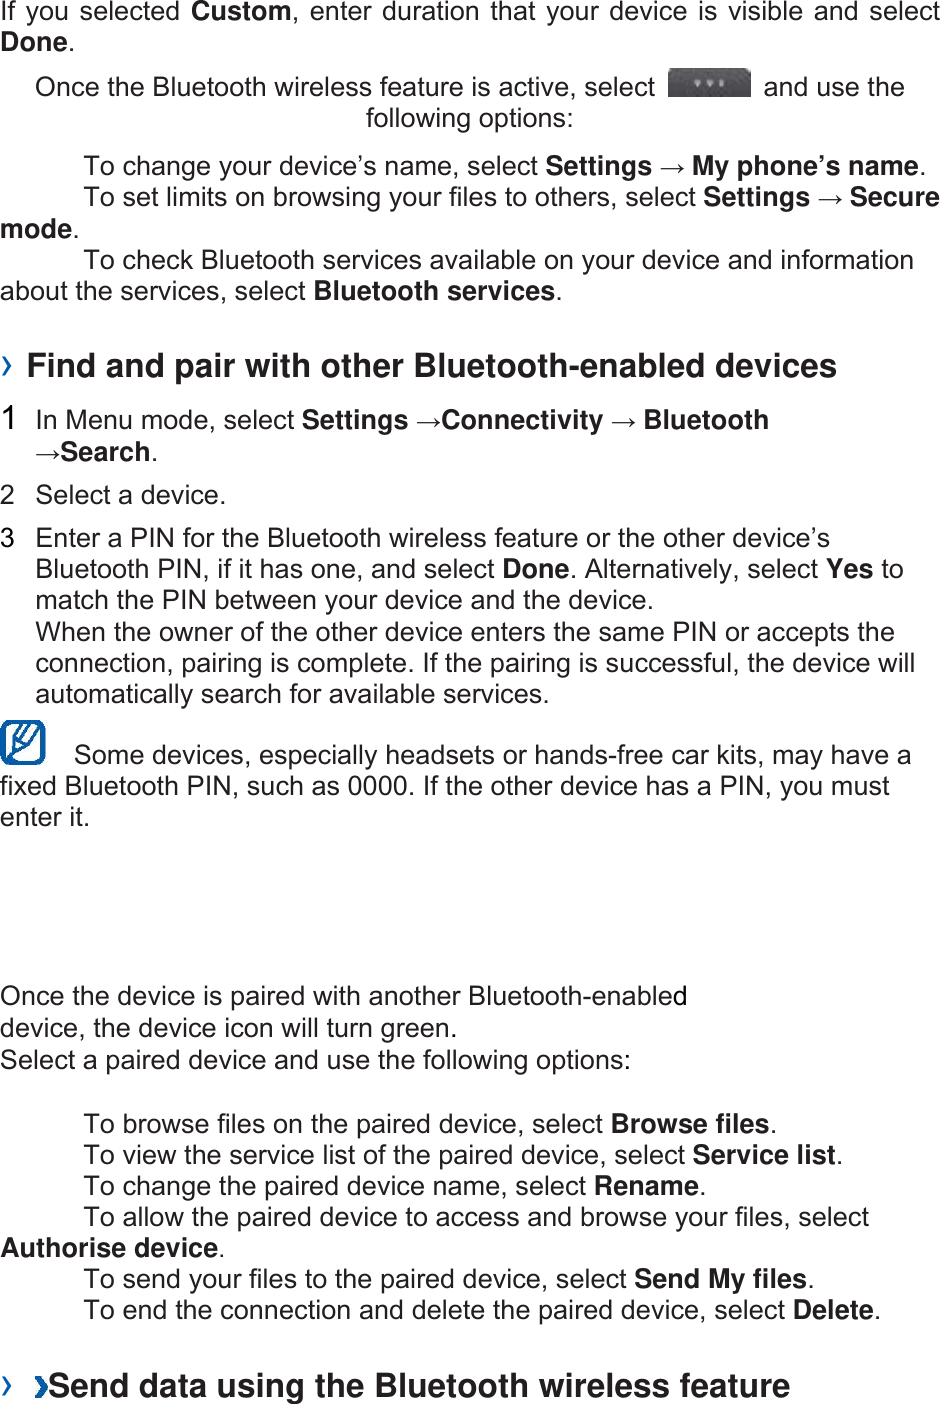 If you selected Custom, enter duration that your device is visible and select Done.  Once the Bluetooth wireless feature is active, select    and use the following options:     To change your device’s name, select Settings → My phone’s name.    To set limits on browsing your files to others, select Settings → Secure mode.    To check Bluetooth services available on your device and information about the services, select Bluetooth services.   › Find and pair with other Bluetooth-enabled devices   1  In Menu mode, select Settings →Connectivity → Bluetooth →Search.  2  Select a device.   3  Enter a PIN for the Bluetooth wireless feature or the other device’s Bluetooth PIN, if it has one, and select Done. Alternatively, select Yes to match the PIN between your device and the device.   When the owner of the other device enters the same PIN or accepts the connection, pairing is complete. If the pairing is successful, the device will automatically search for available services.     Some devices, especially headsets or hands-free car kits, may have a fixed Bluetooth PIN, such as 0000. If the other device has a PIN, you must enter it.   Once the device is paired with another Bluetooth-enabled device, the device icon will turn green. Select a paired device and use the following options:    To browse files on the paired device, select Browse files.    To view the service list of the paired device, select Service list.    To change the paired device name, select Rename.   To allow the paired device to access and browse your files, select Authorise device.    To send your files to the paired device, select Send My files.    To end the connection and delete the paired device, select Delete.   ›  Send data using the Bluetooth wireless feature   